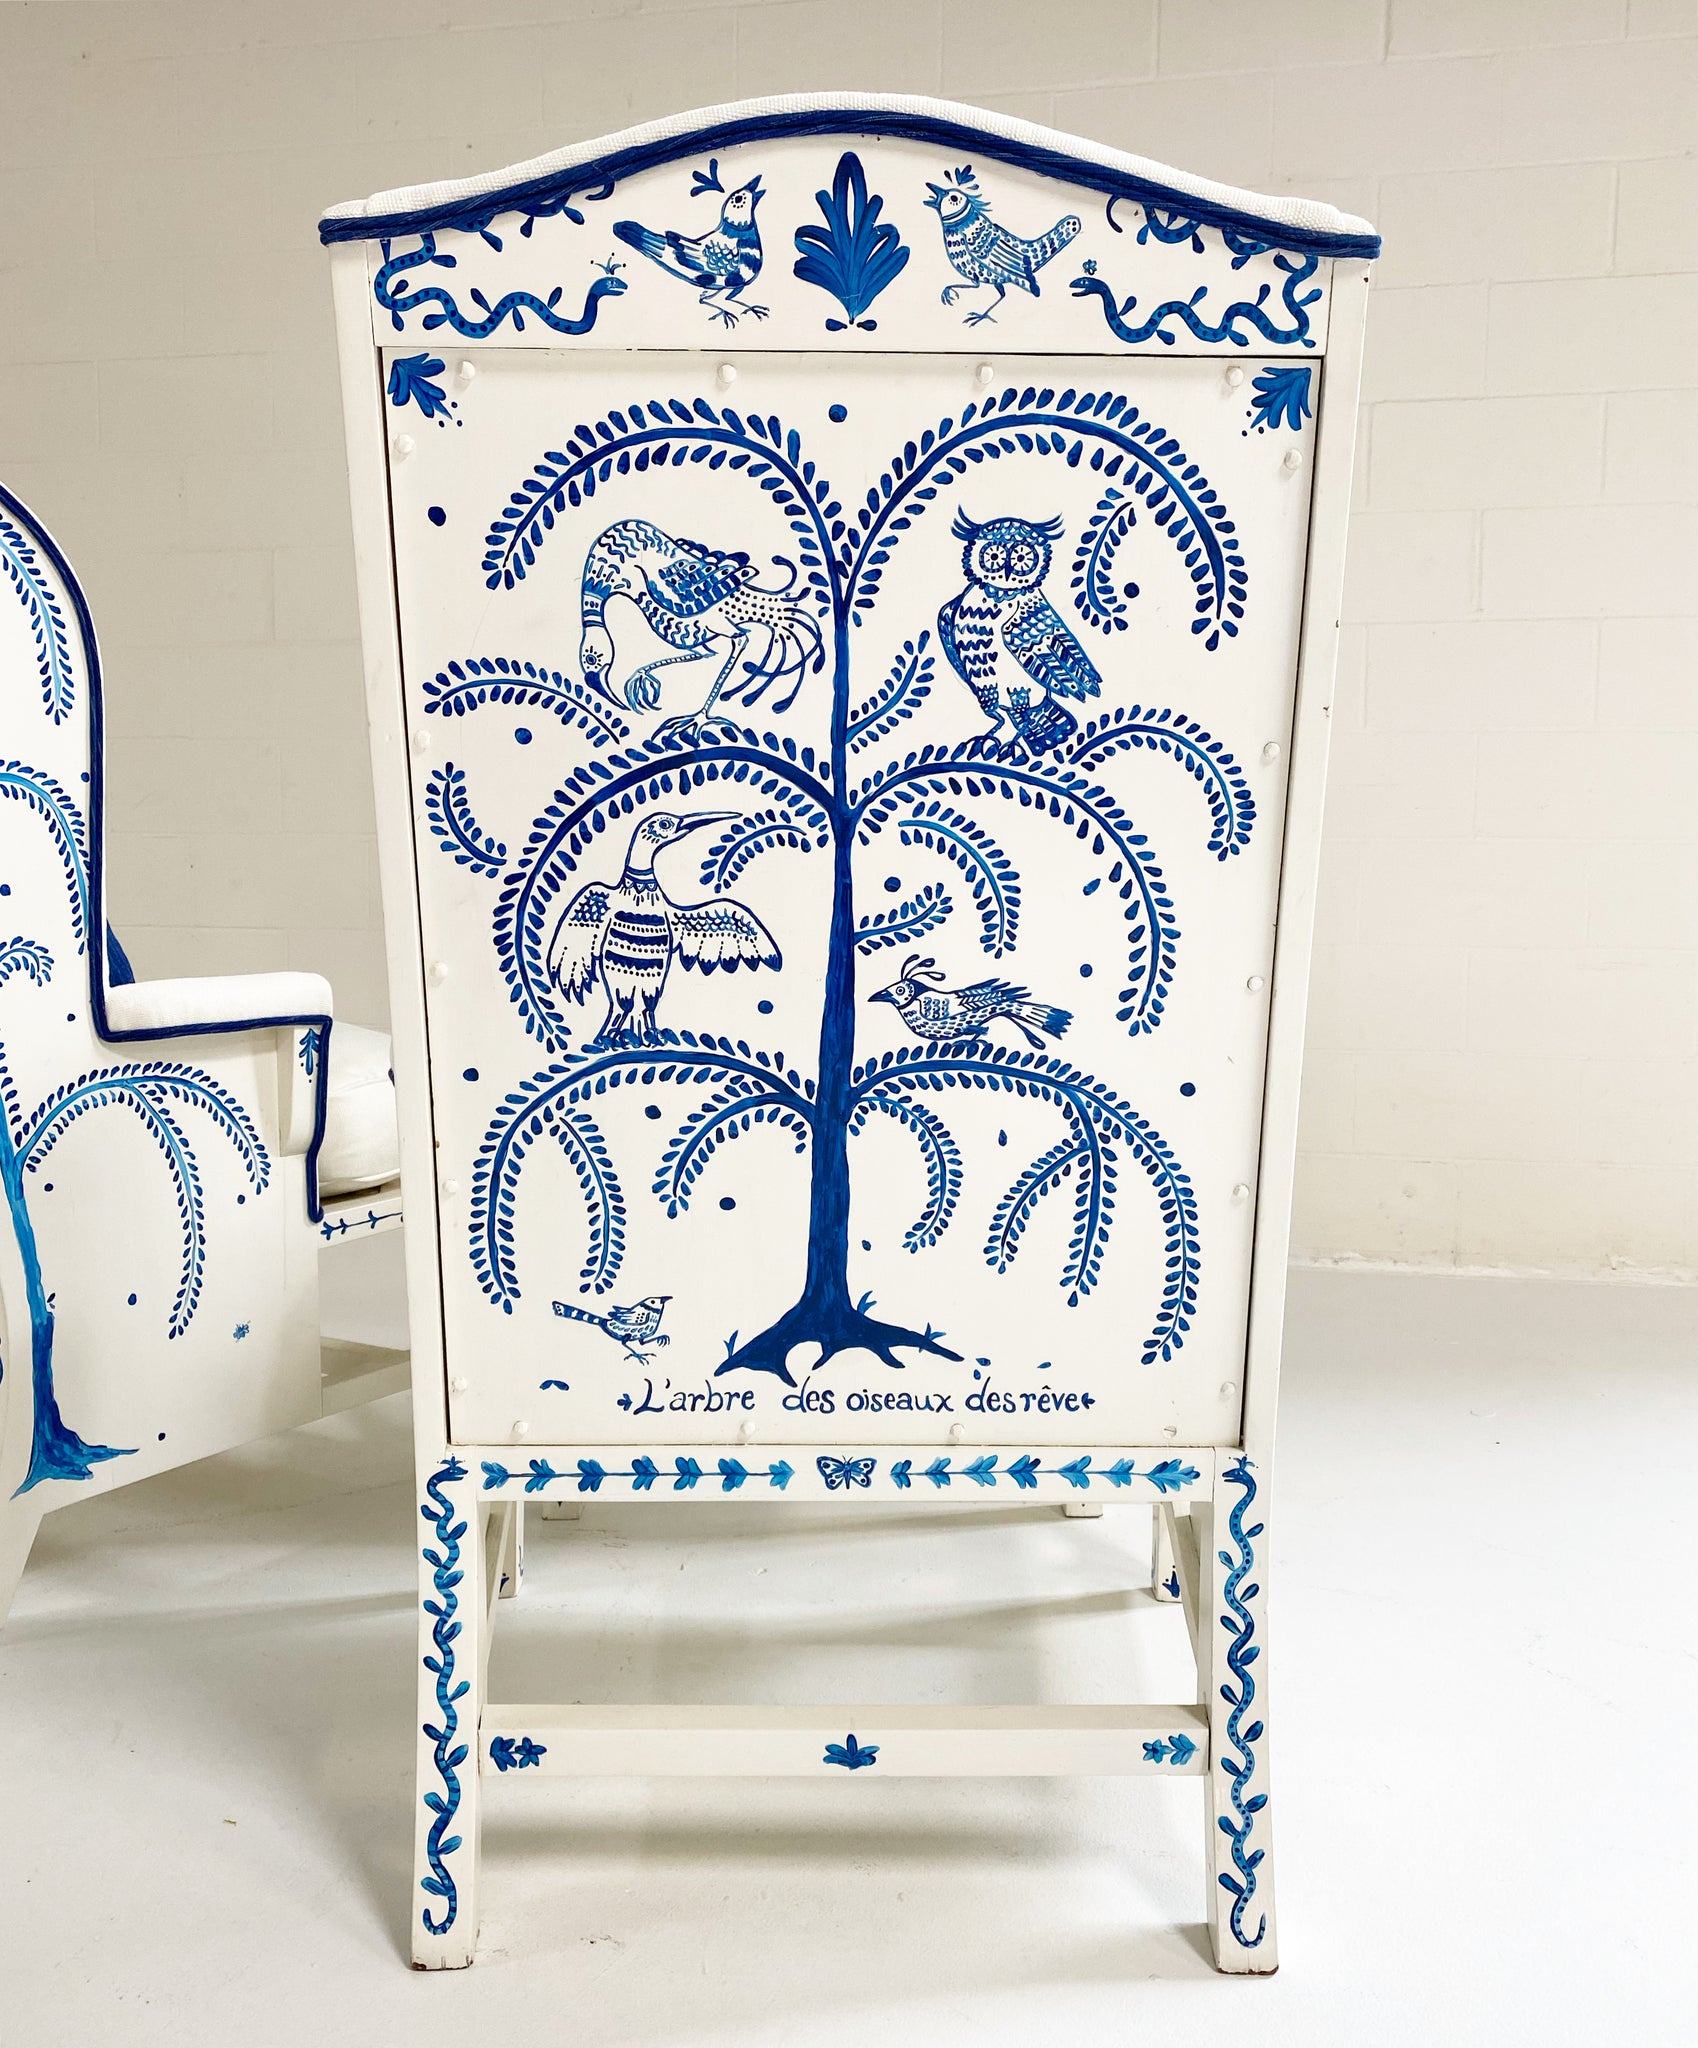 One-of-a-Kind, Hand-Painted 'Tree of Dream Birds' Set, Pair of Wingbacks with Ottoman